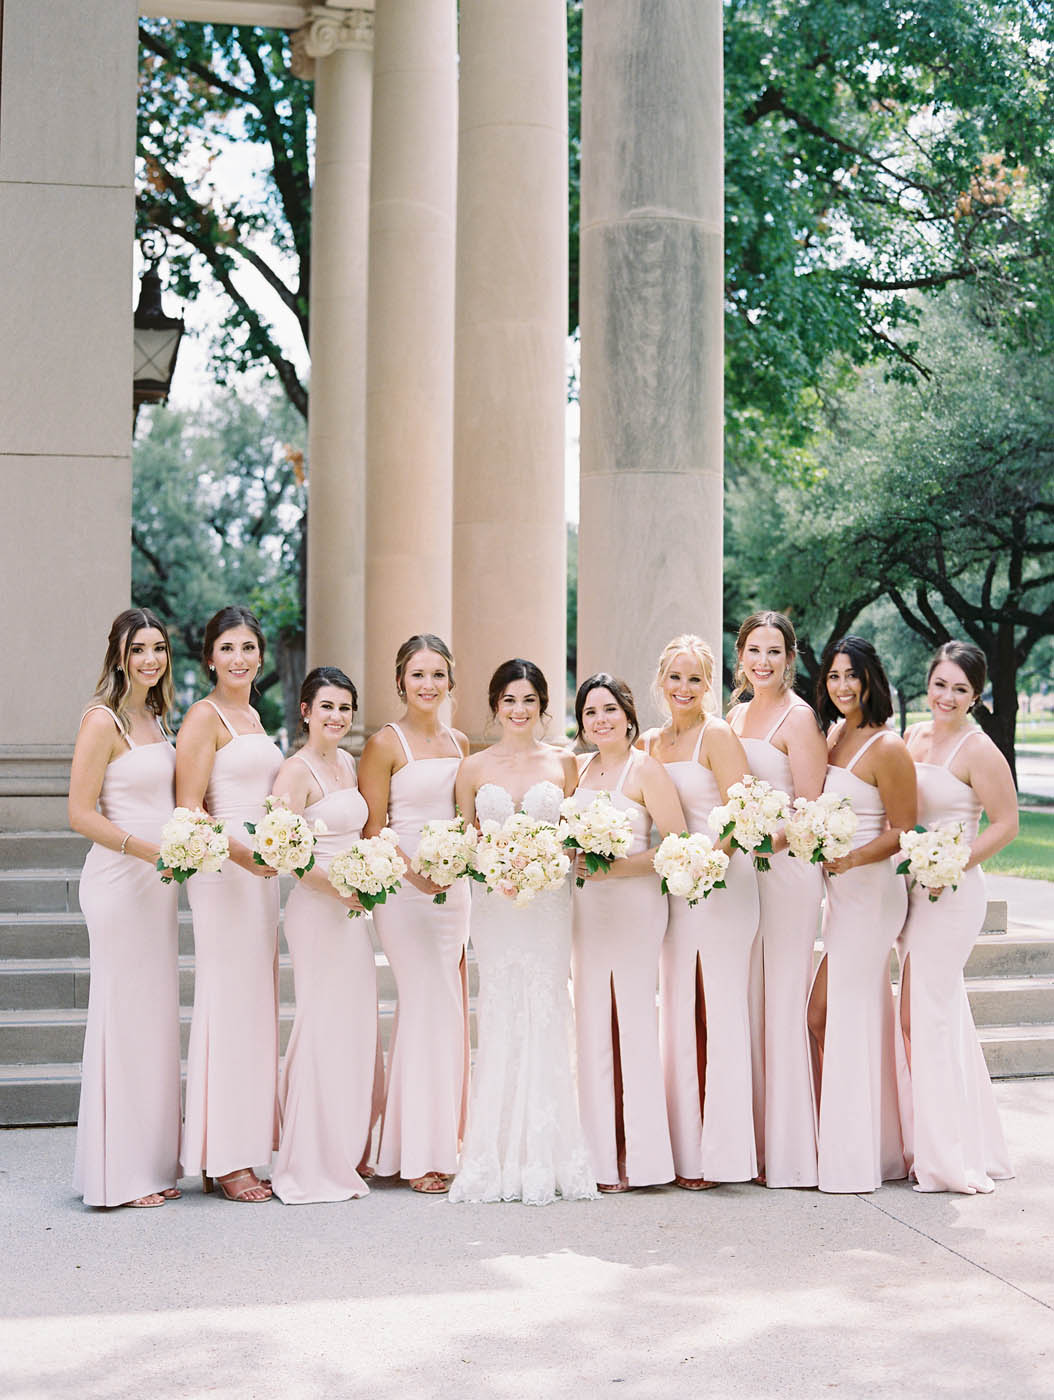 Nikki and her bridesmaids pose for a photo outside Robert Carr chapel